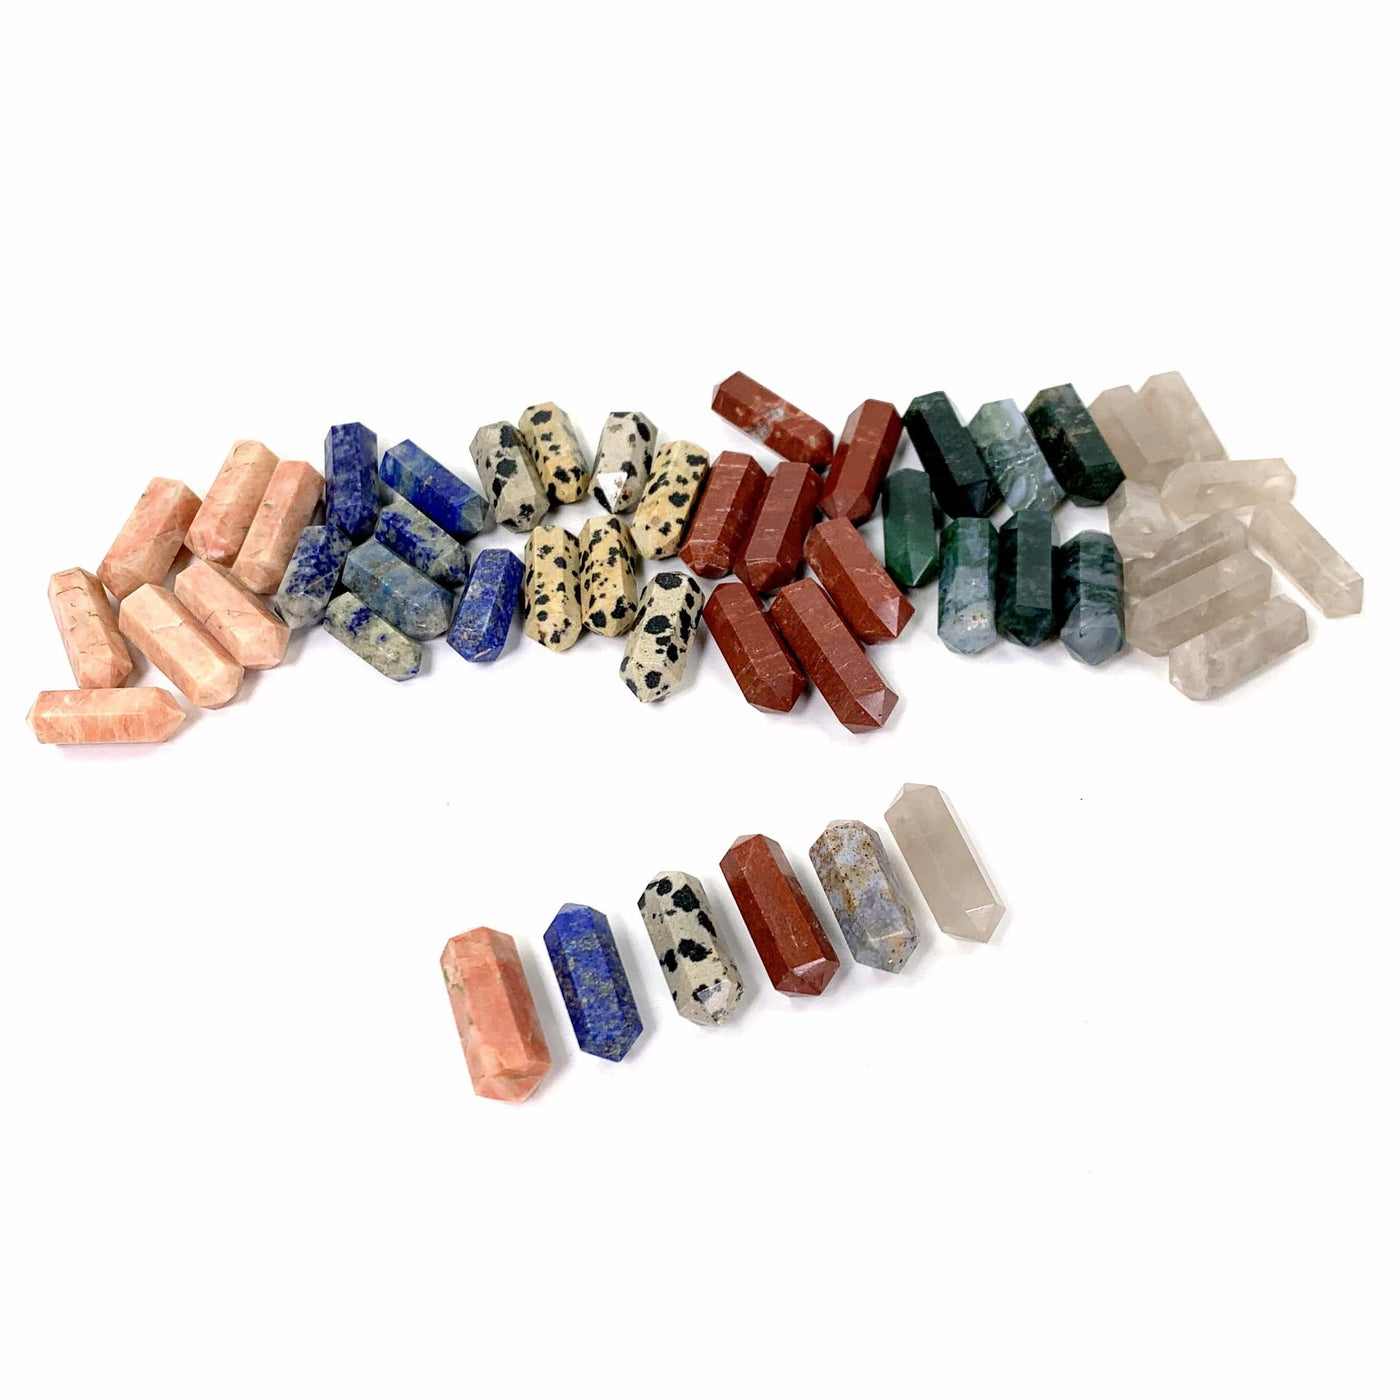 6 Piles of Gemstones With a Single Gemstone From Each in a Line in Front on White Background.